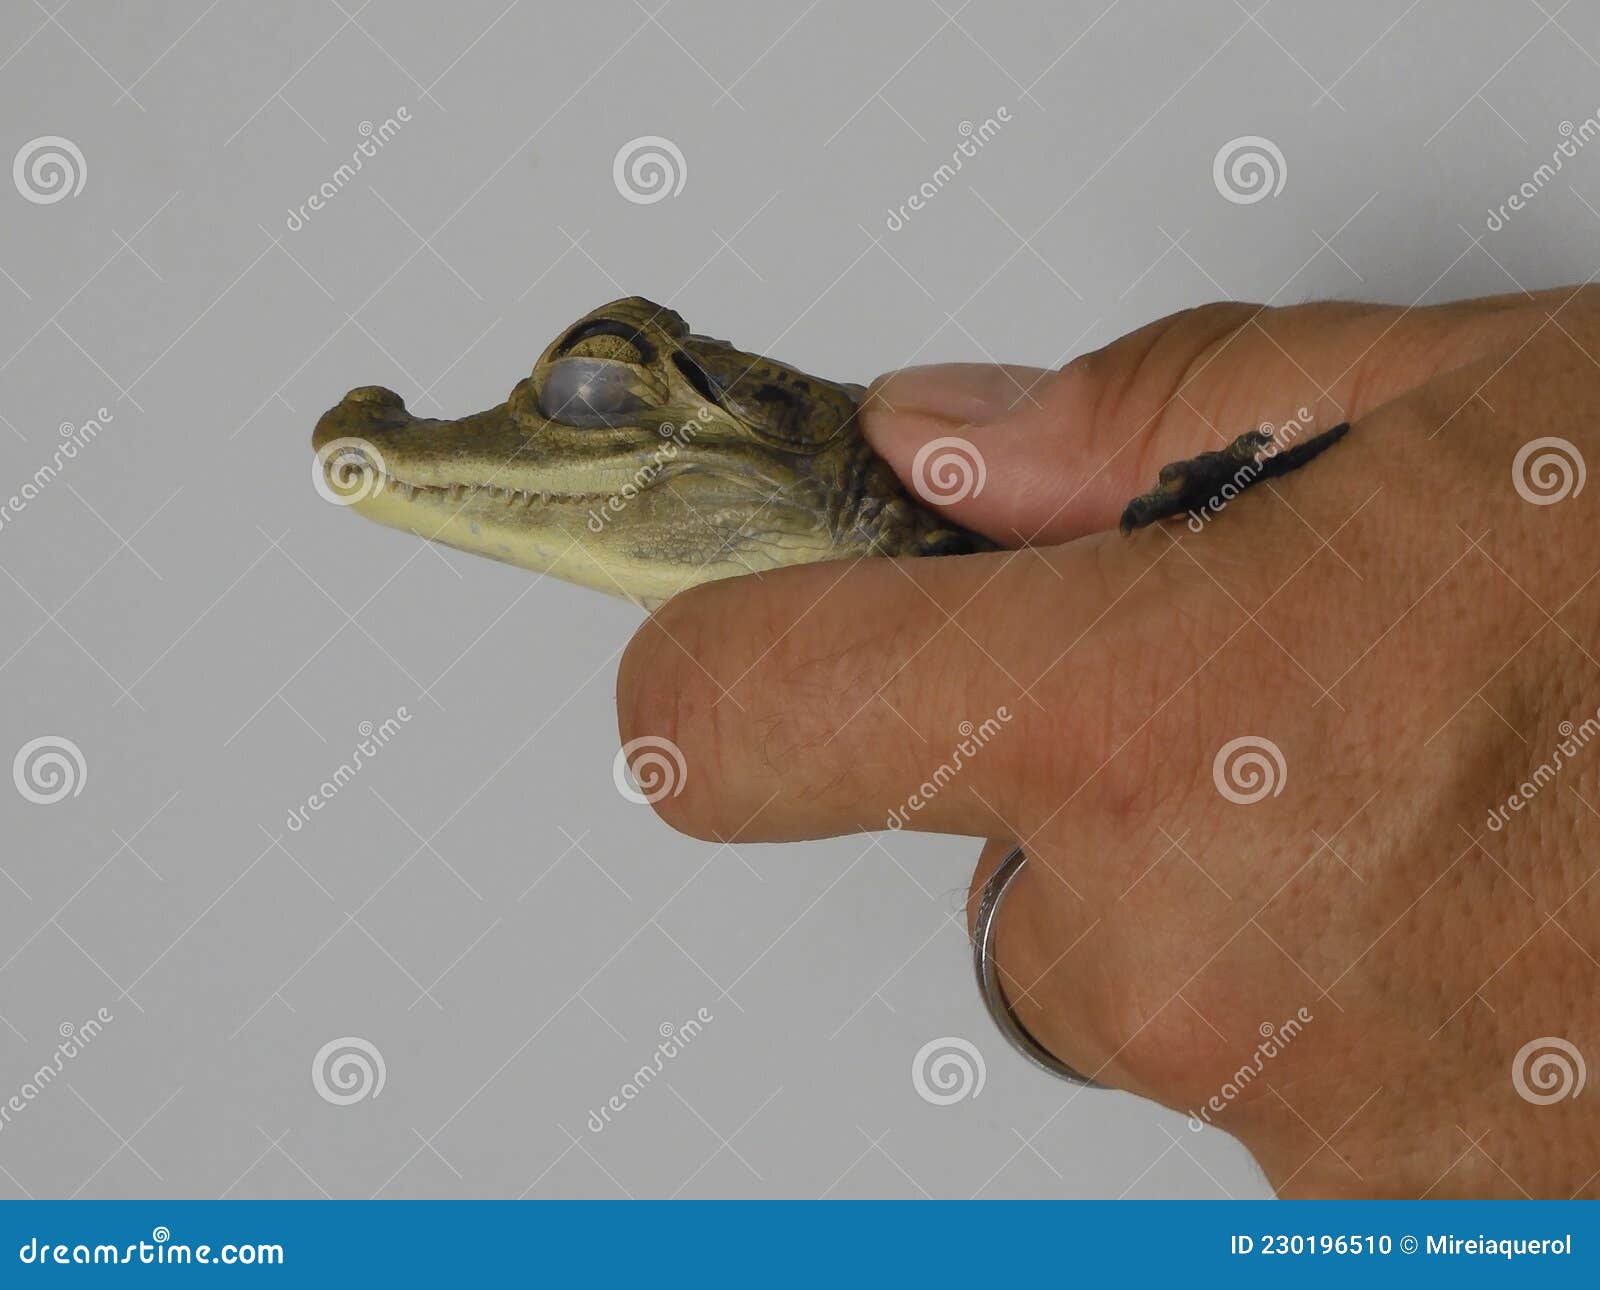 veterinarian catching a baby crocodile. you can see the third eyelid and the eardrum cover. white background